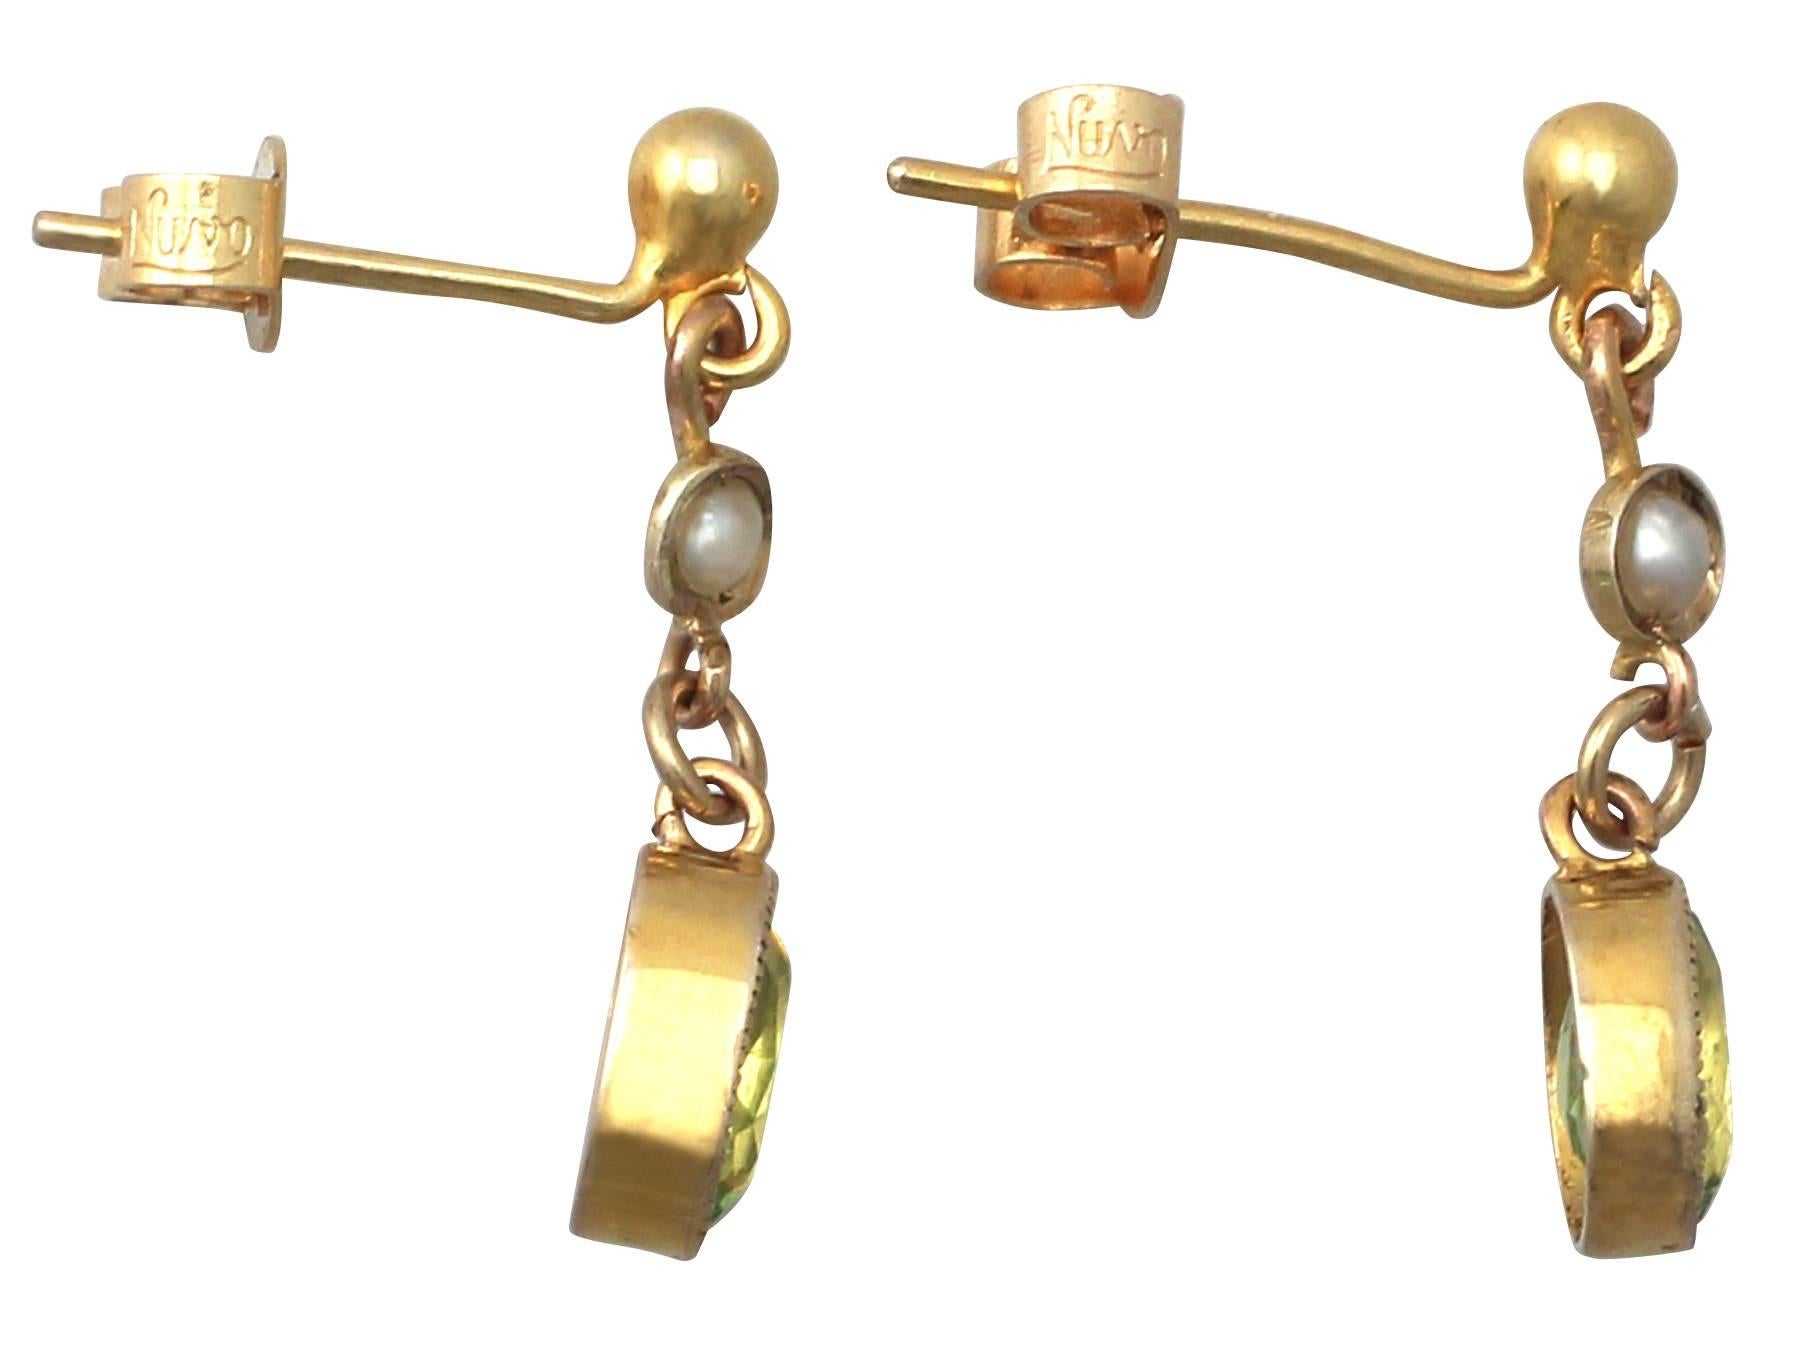 A fine and impressive pair of antique 1.22 carat natural peridot and pearl, 9 karat yellow gold drop earrings; part of our antique jewelry and estate jewelry collections

This fine and impressive antique peridot earrings have been crafted in 9k